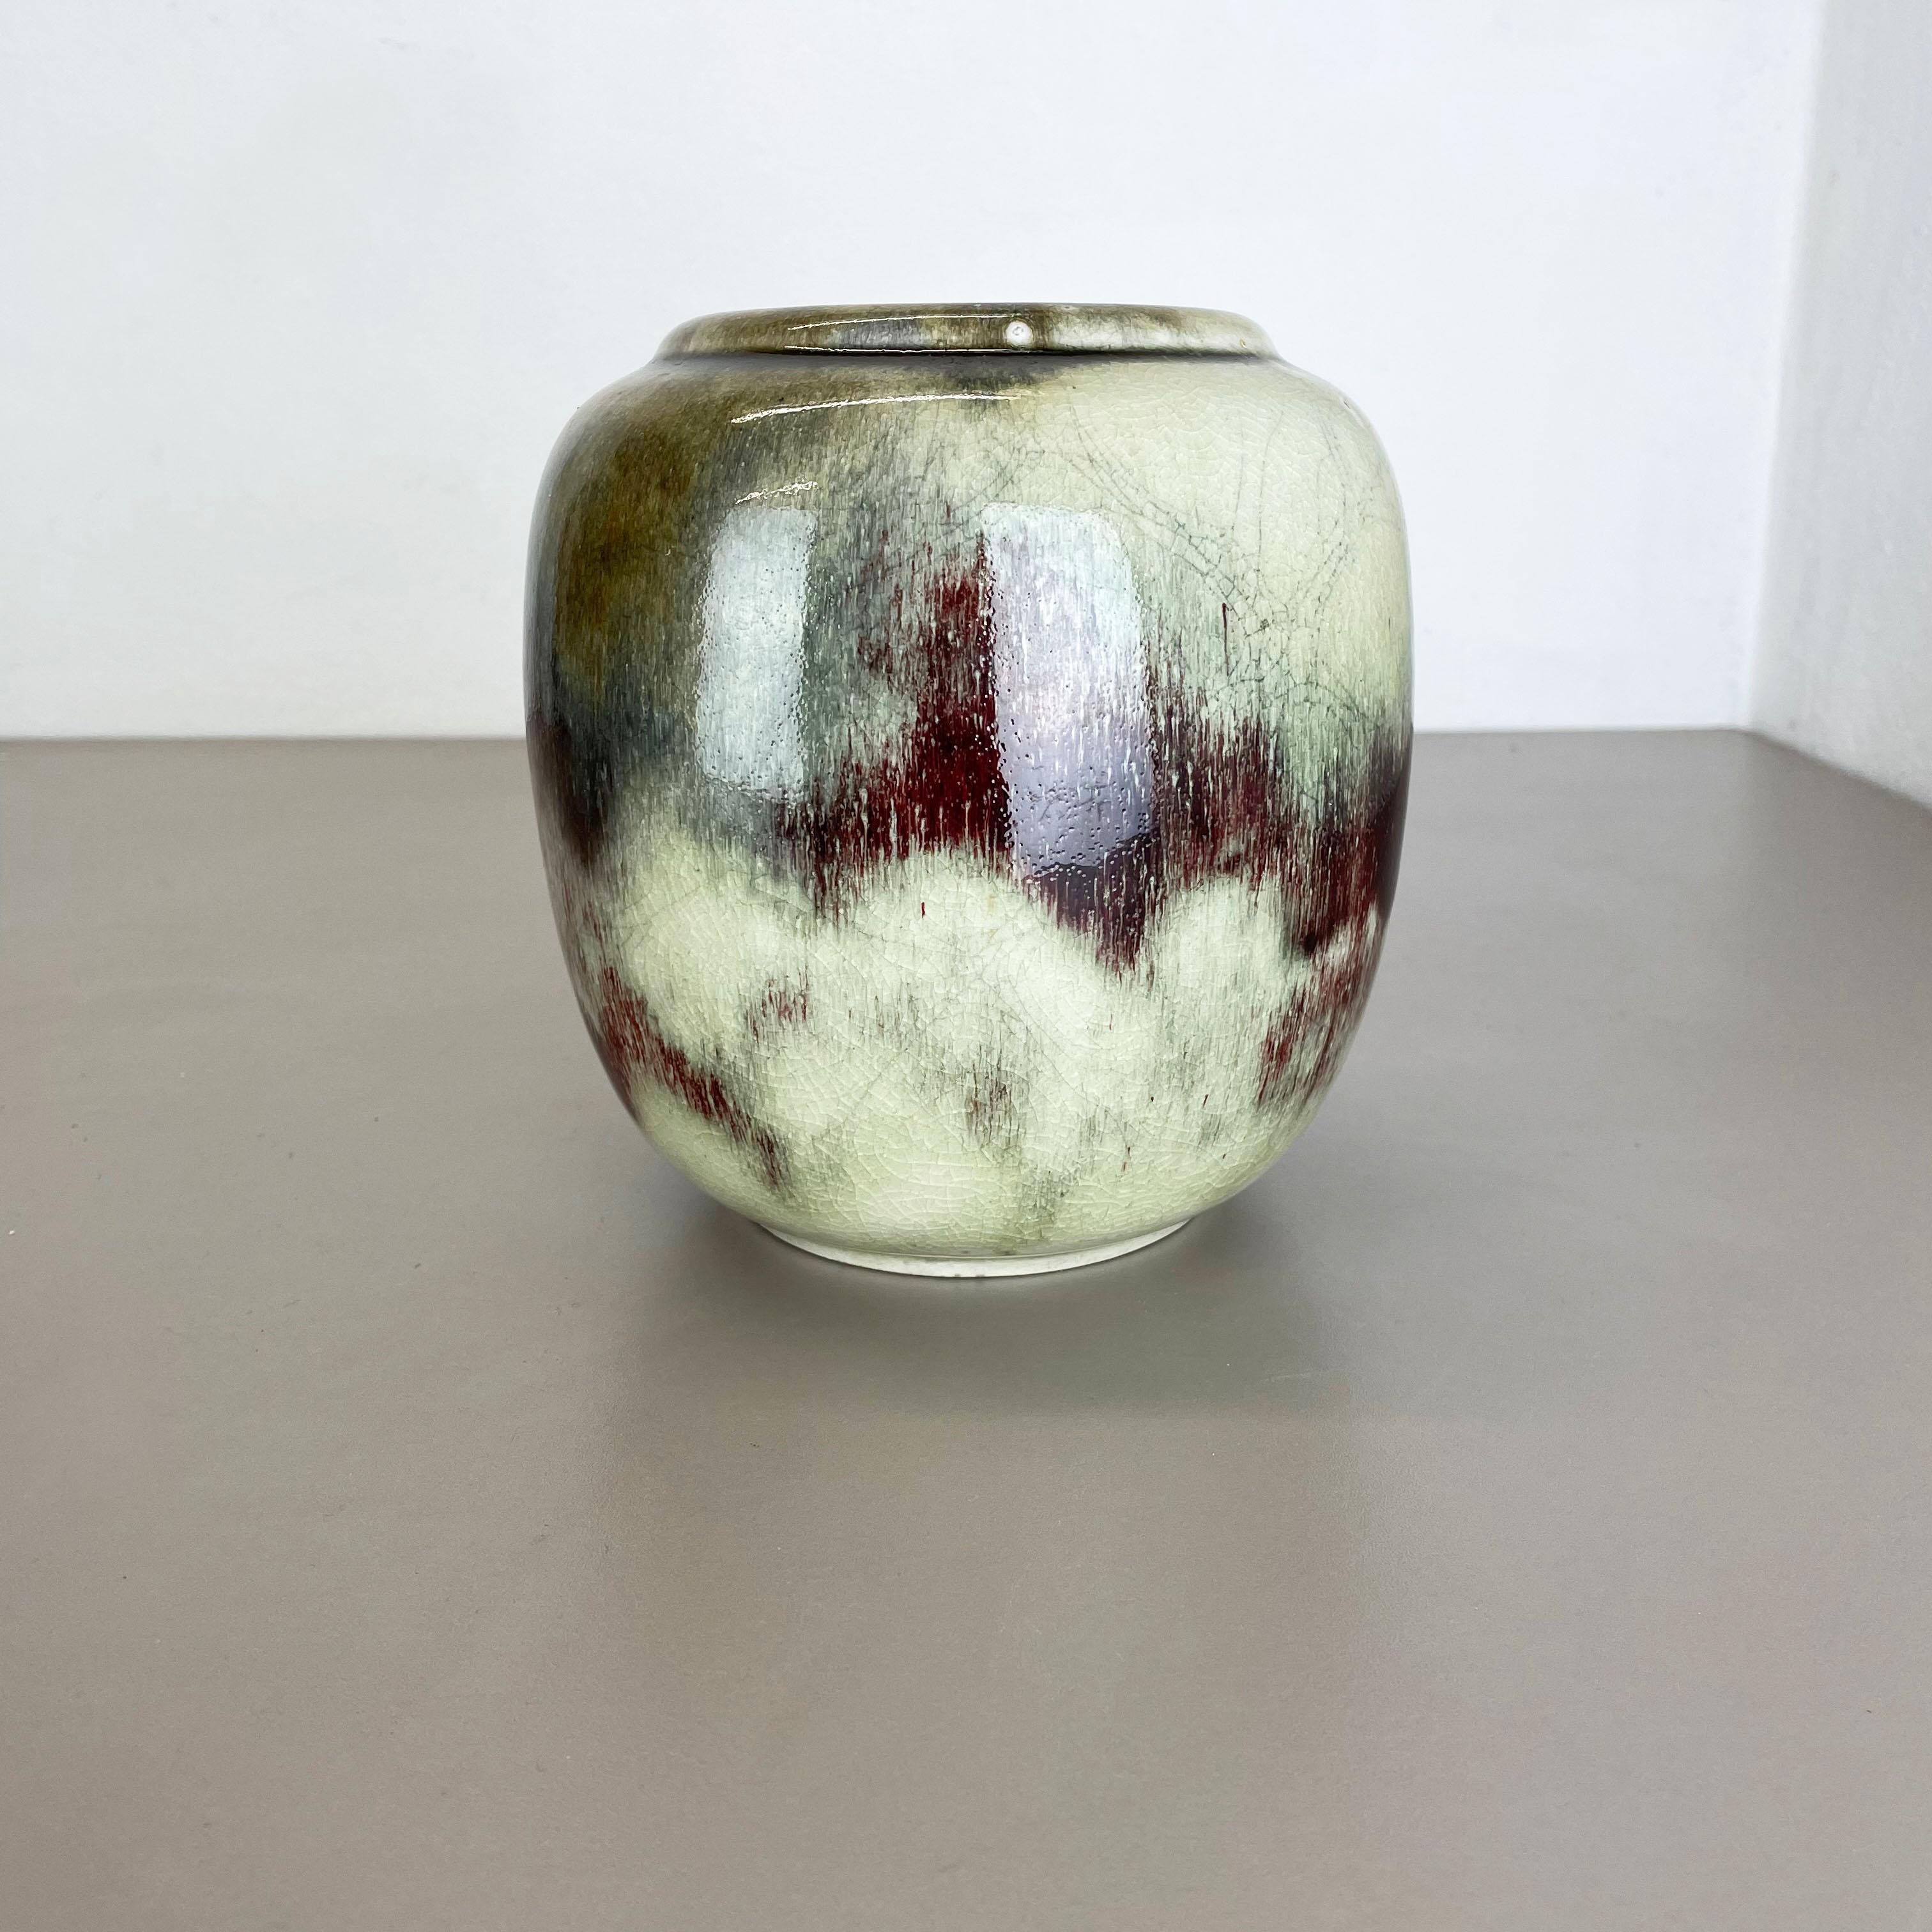 Article: ceramic vase object



Producer: WMF, Germany 



Age: 1930s



Description: 

Wonderful heavy Art Deco vase element designed and produced by WMF, Germany in the 1930s. This glass bowl is part the WMF Ikora collection made of